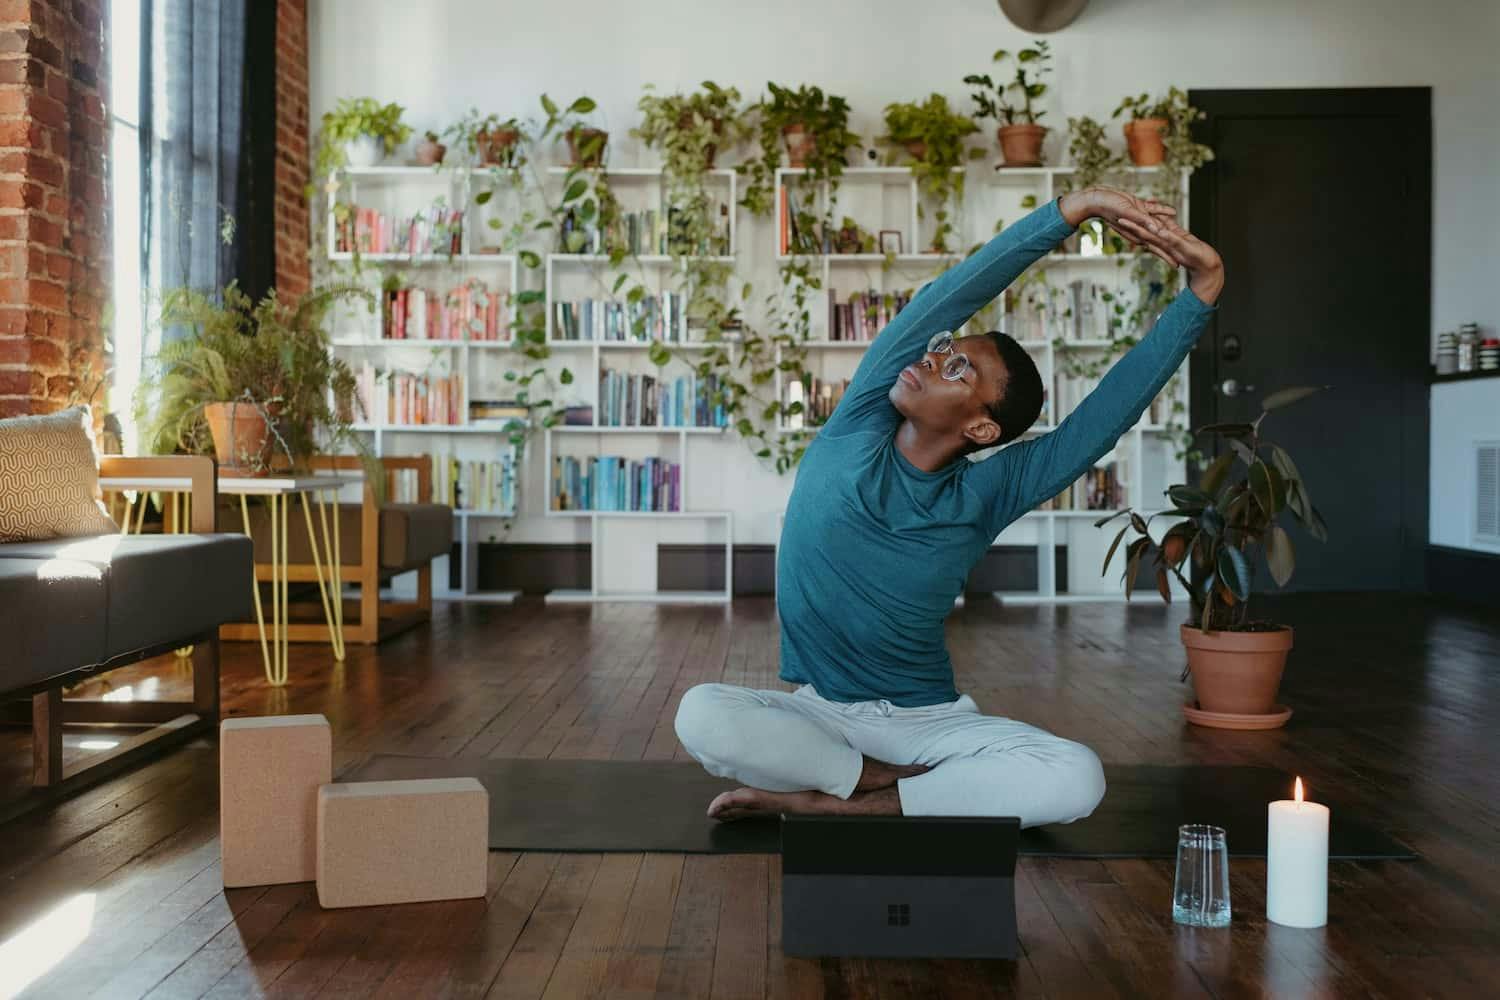 Image shows person doing yoga stretches